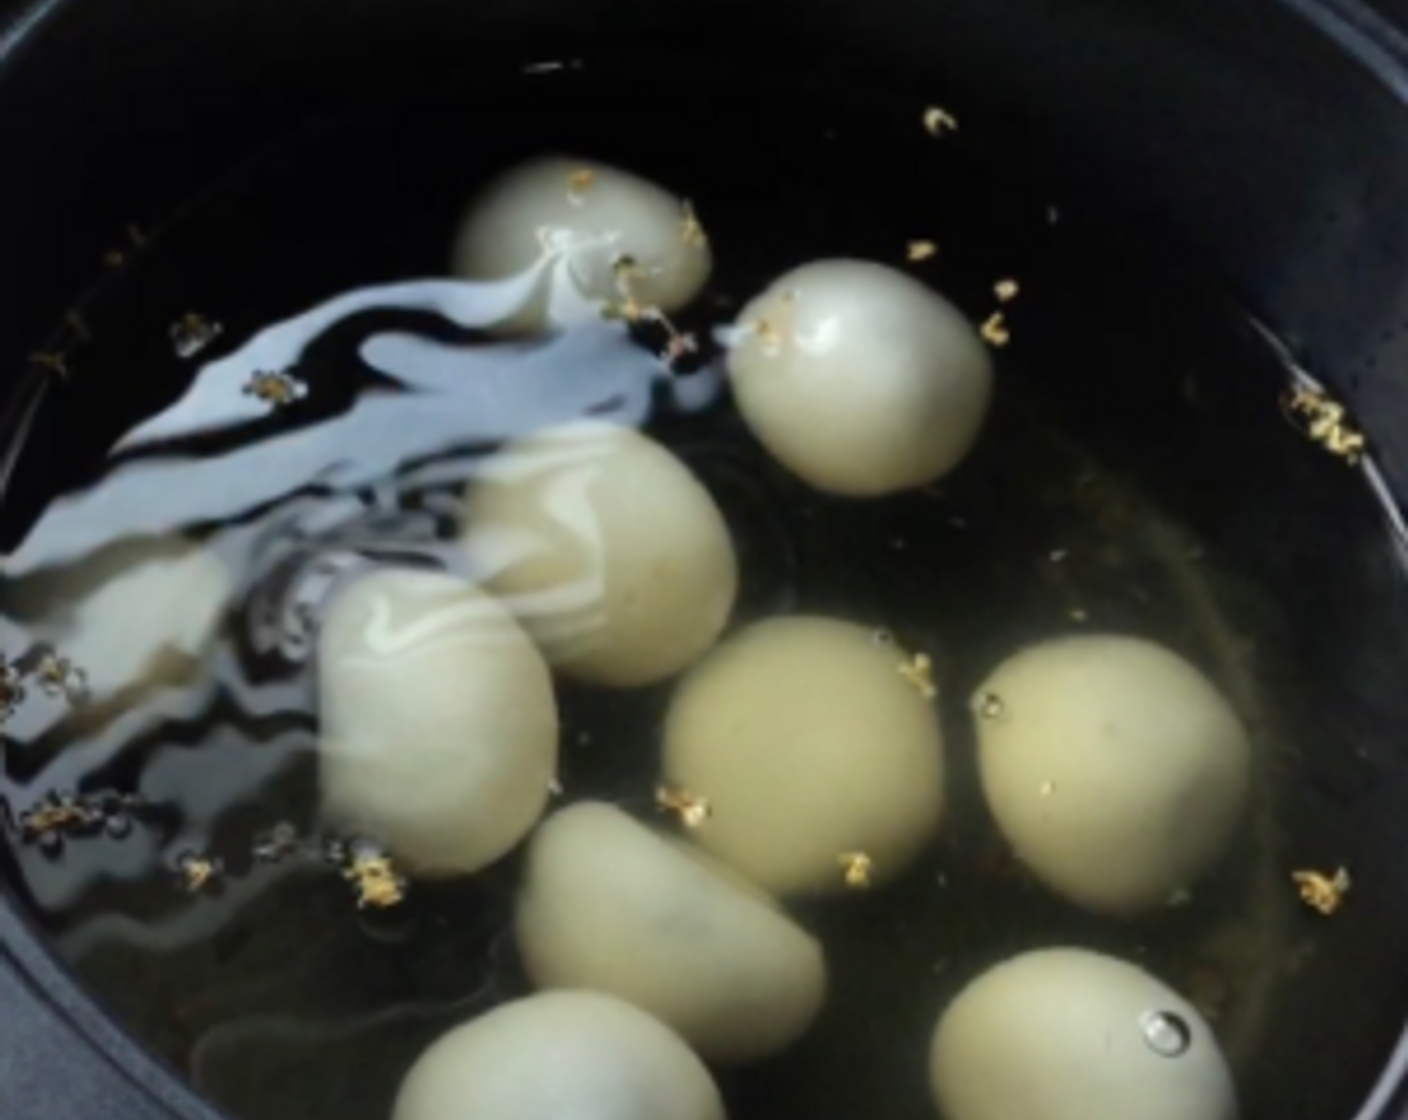 step 26 Then place the glutinous rice balls into the pot of ginger syrup prepared earlier. And we're done!